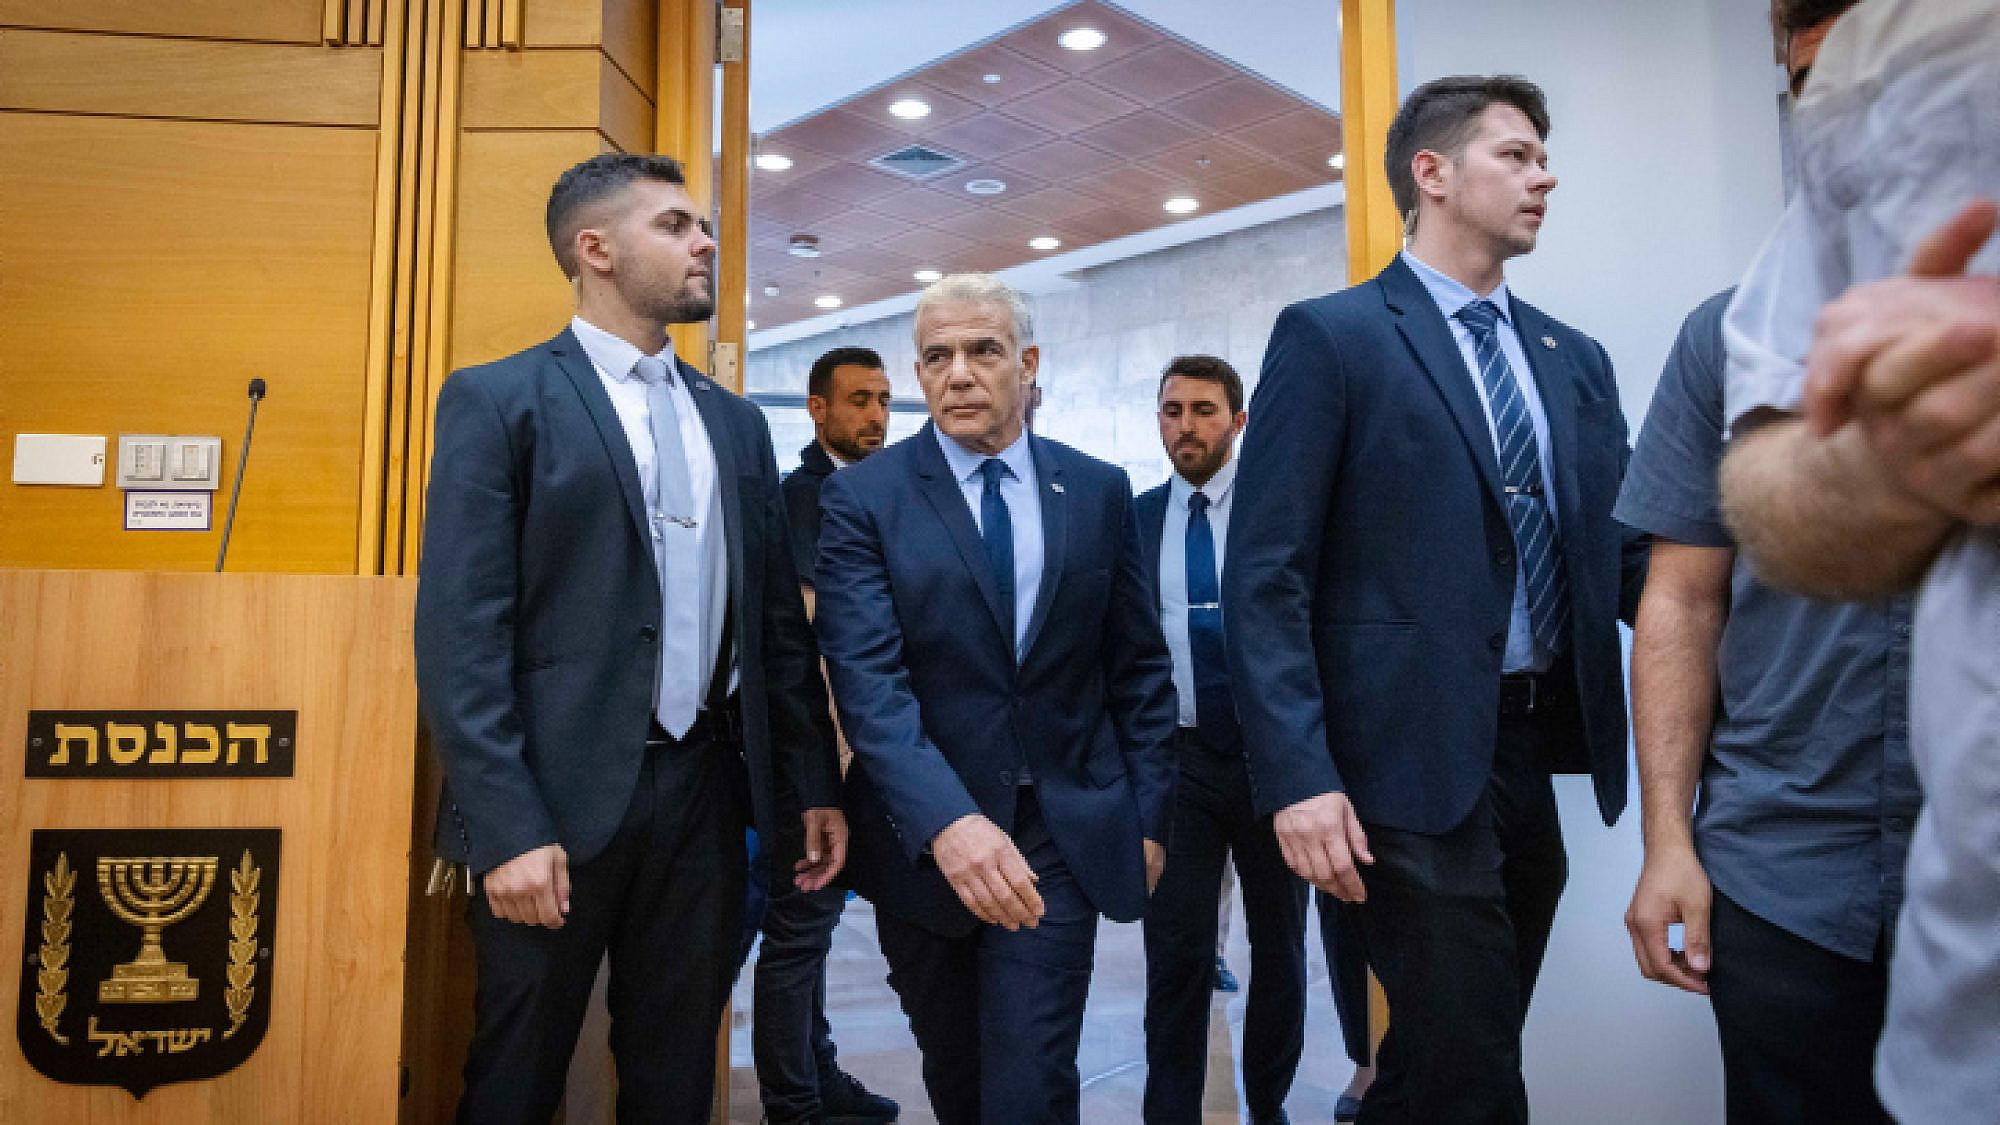 Then-Prime Minister Yair Lapid enters a meeting of his Yesh Atid Party at the Knesset, Dec. 5, 2022. Photo by Olivier Fitoussi/Flash90.